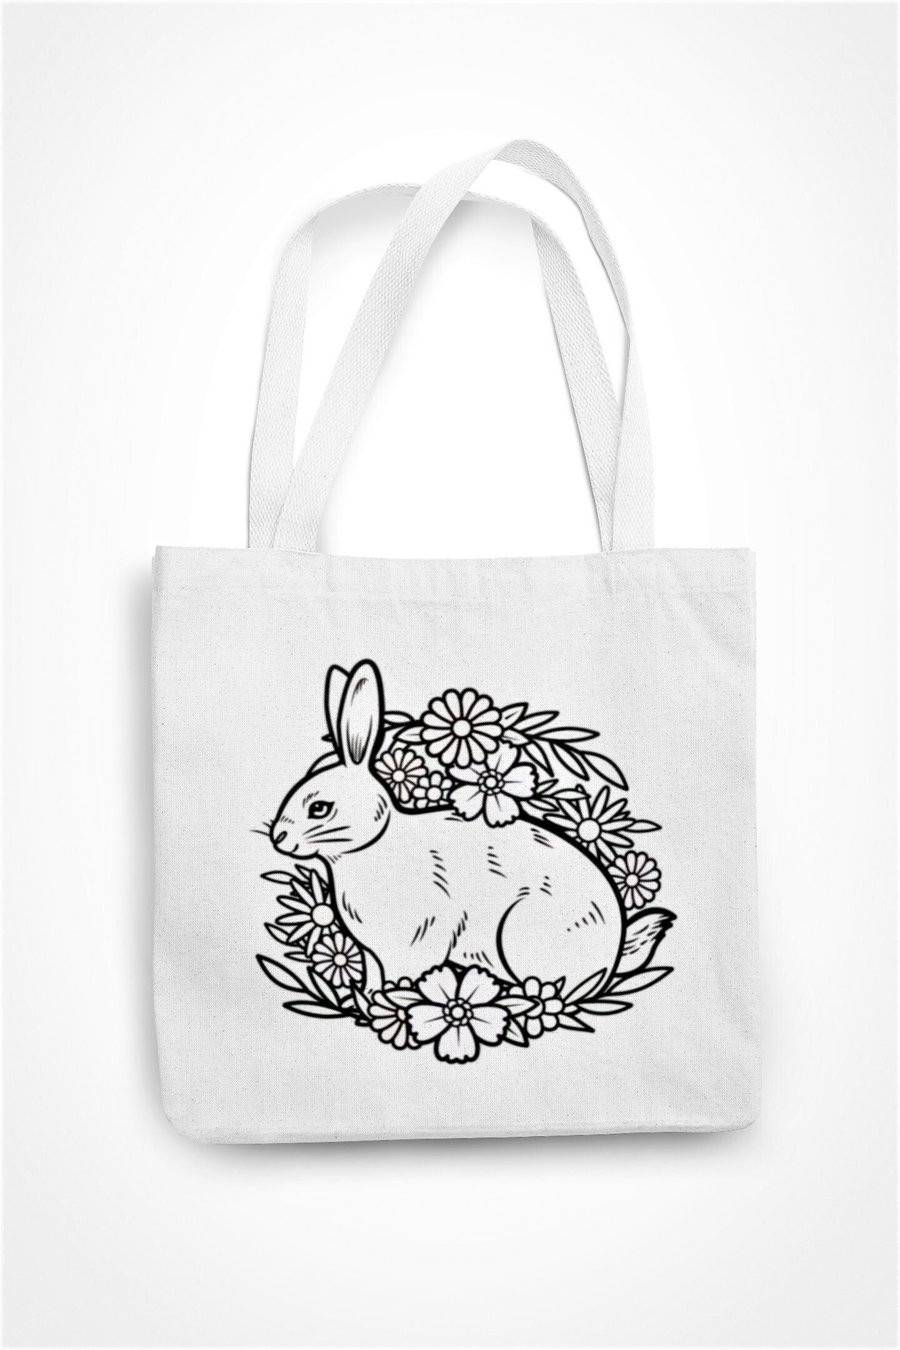 Floral Rabbit Print Tote Bag Eco Friendly Shopping Bag Spring time Easter Bunny 